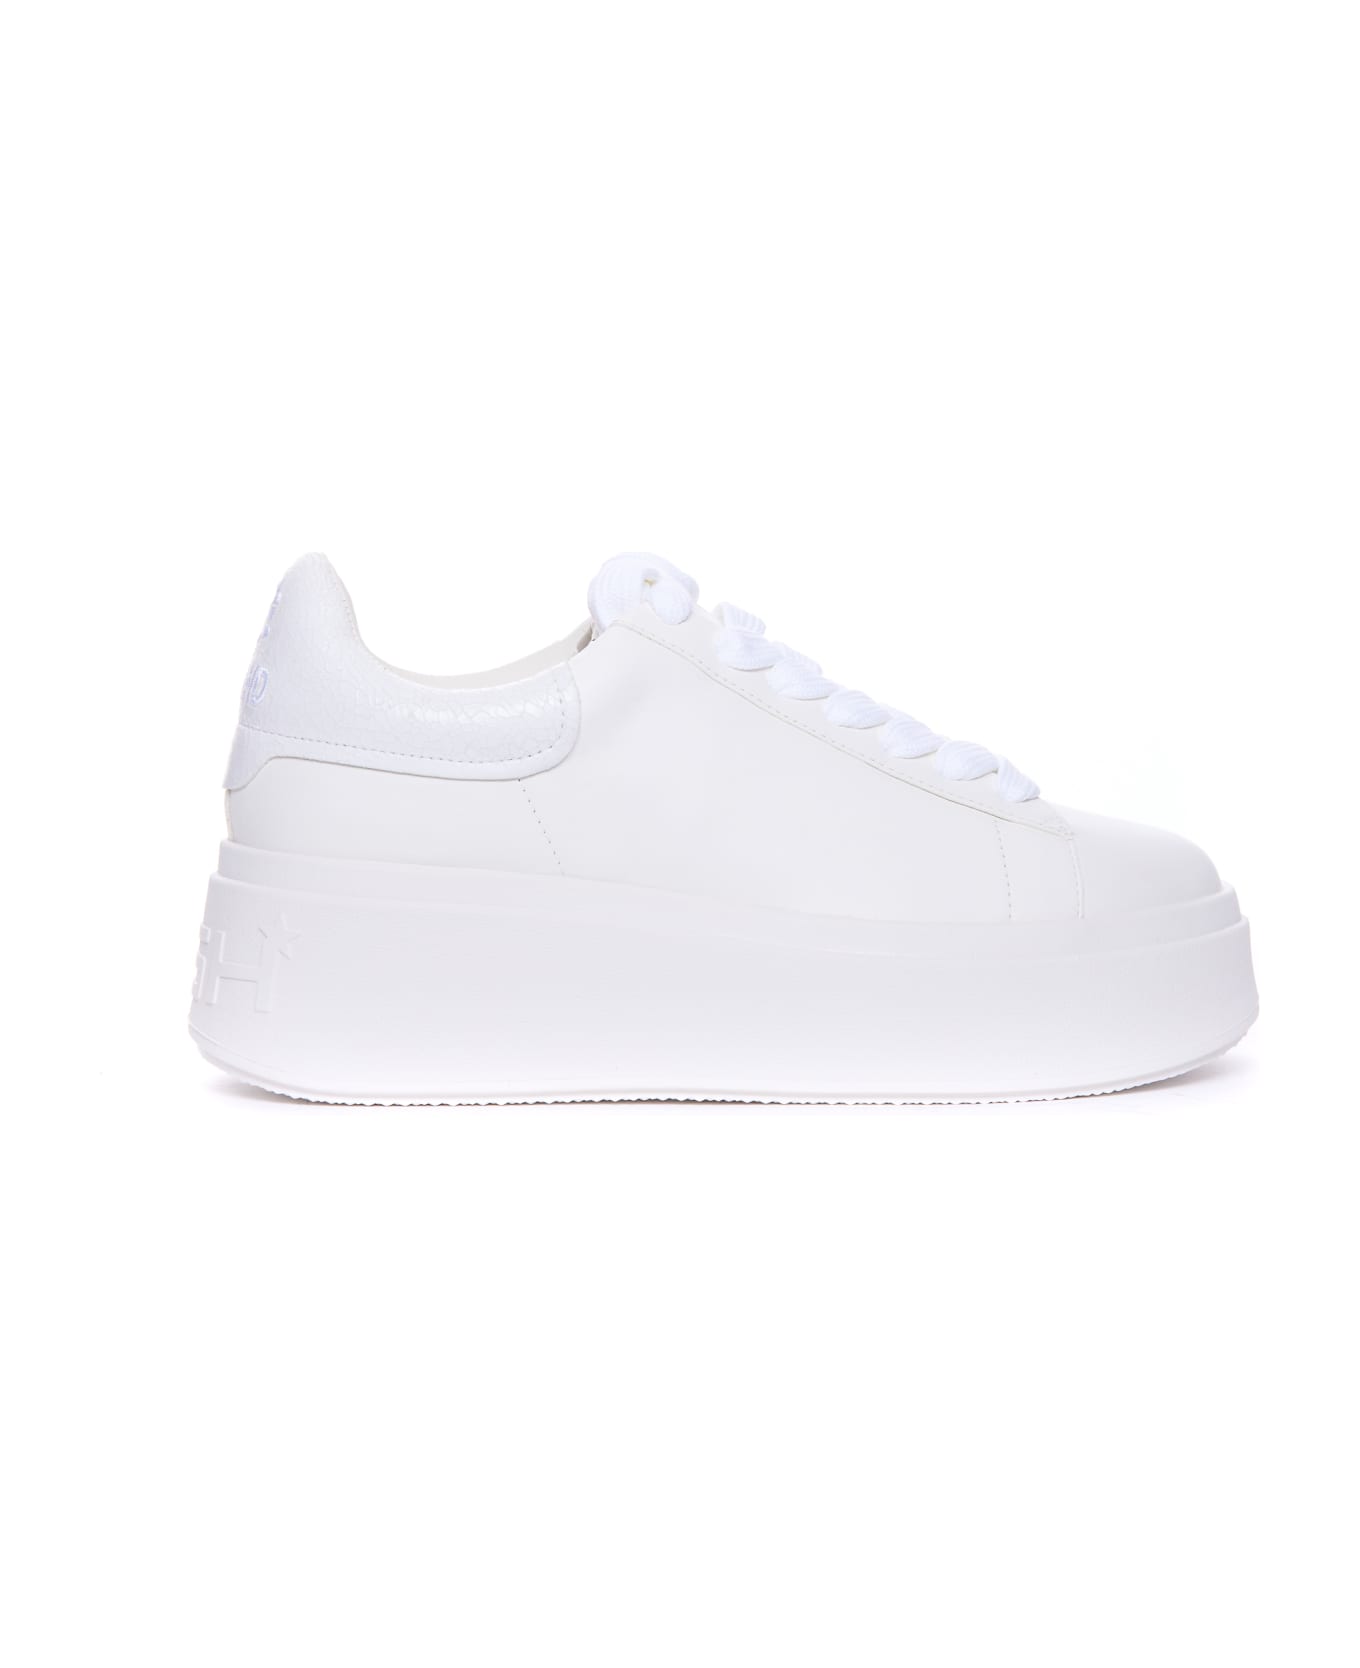 Ash Mobybekind Sneakers - White